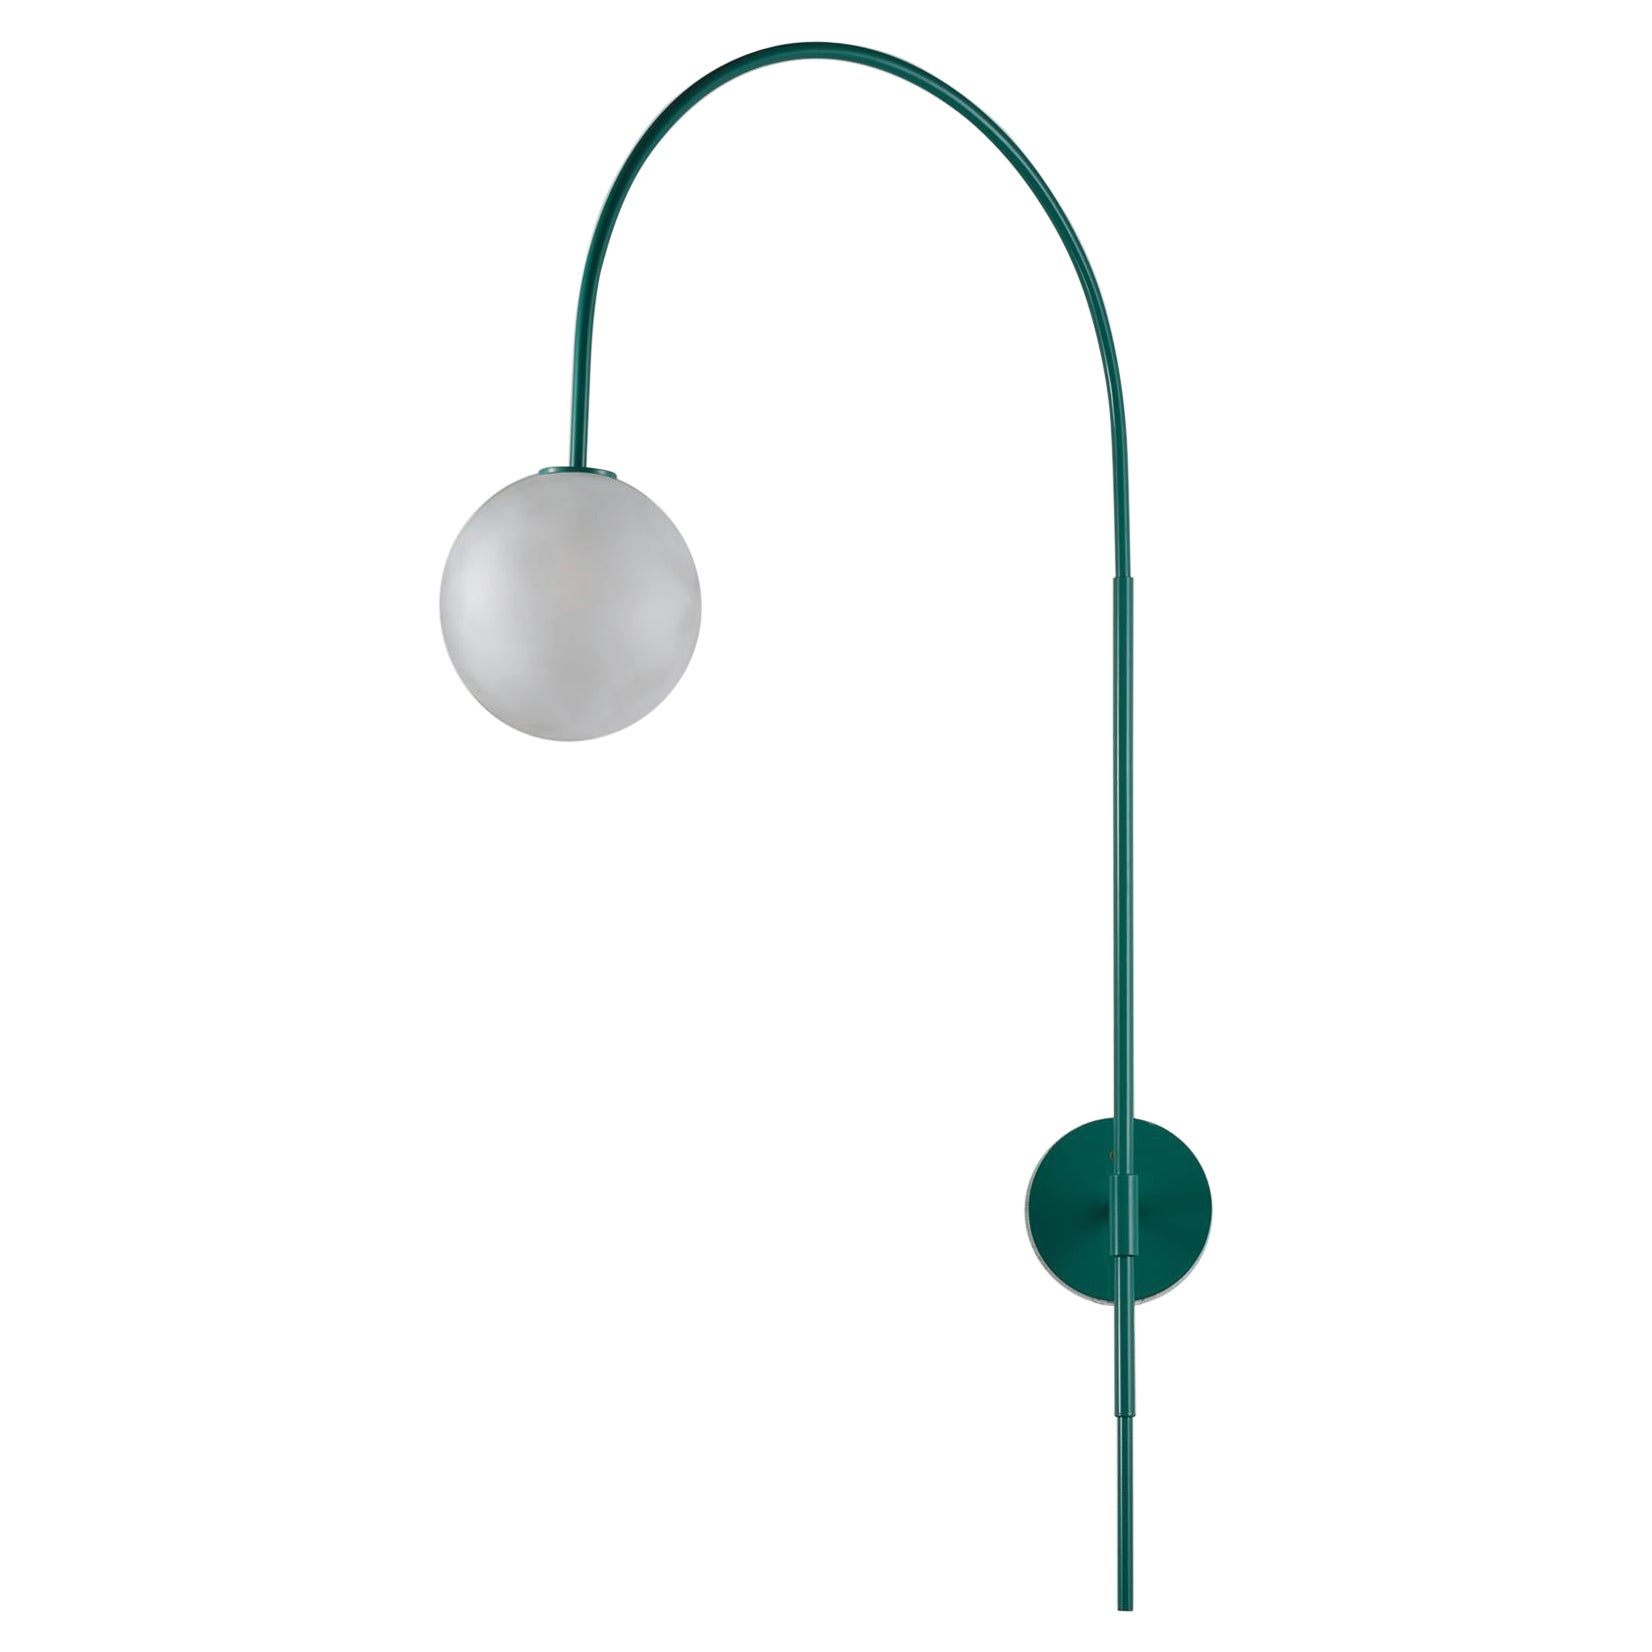 ARC Wall Lamp or Sconce in Green Enamel & Blown Glass by Blueprint Lighting